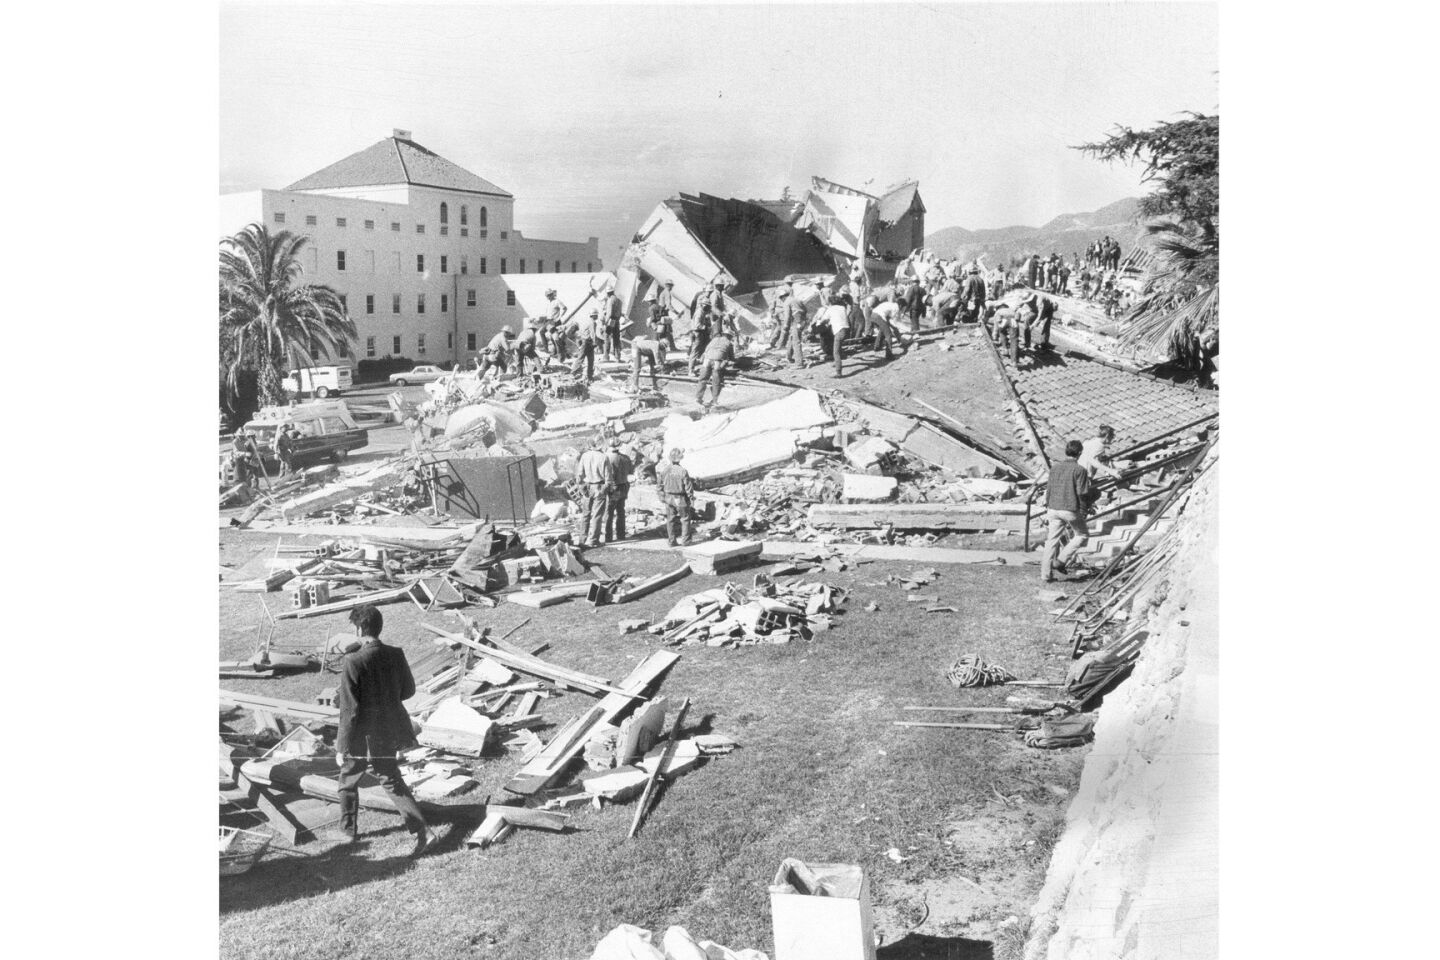 Two concrete buildings at the Veterans Administration Hospital in San Fernando crumbled in the 1971